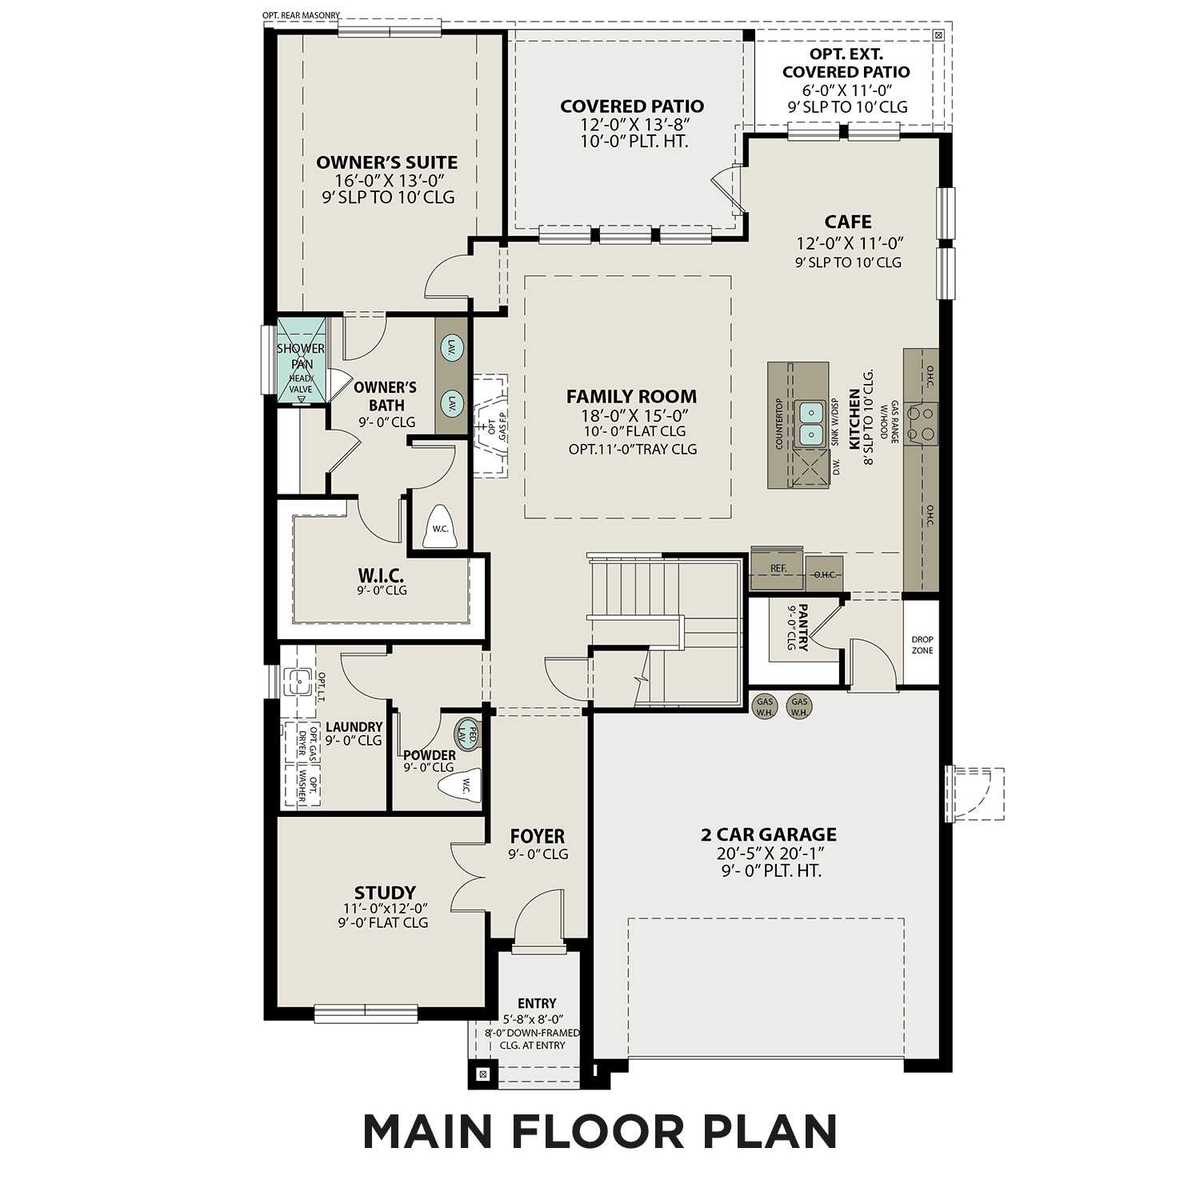 1 - The Sequoia A buildable floor plan layout in Davidson Homes' The Signature Series at Lago Mar community.